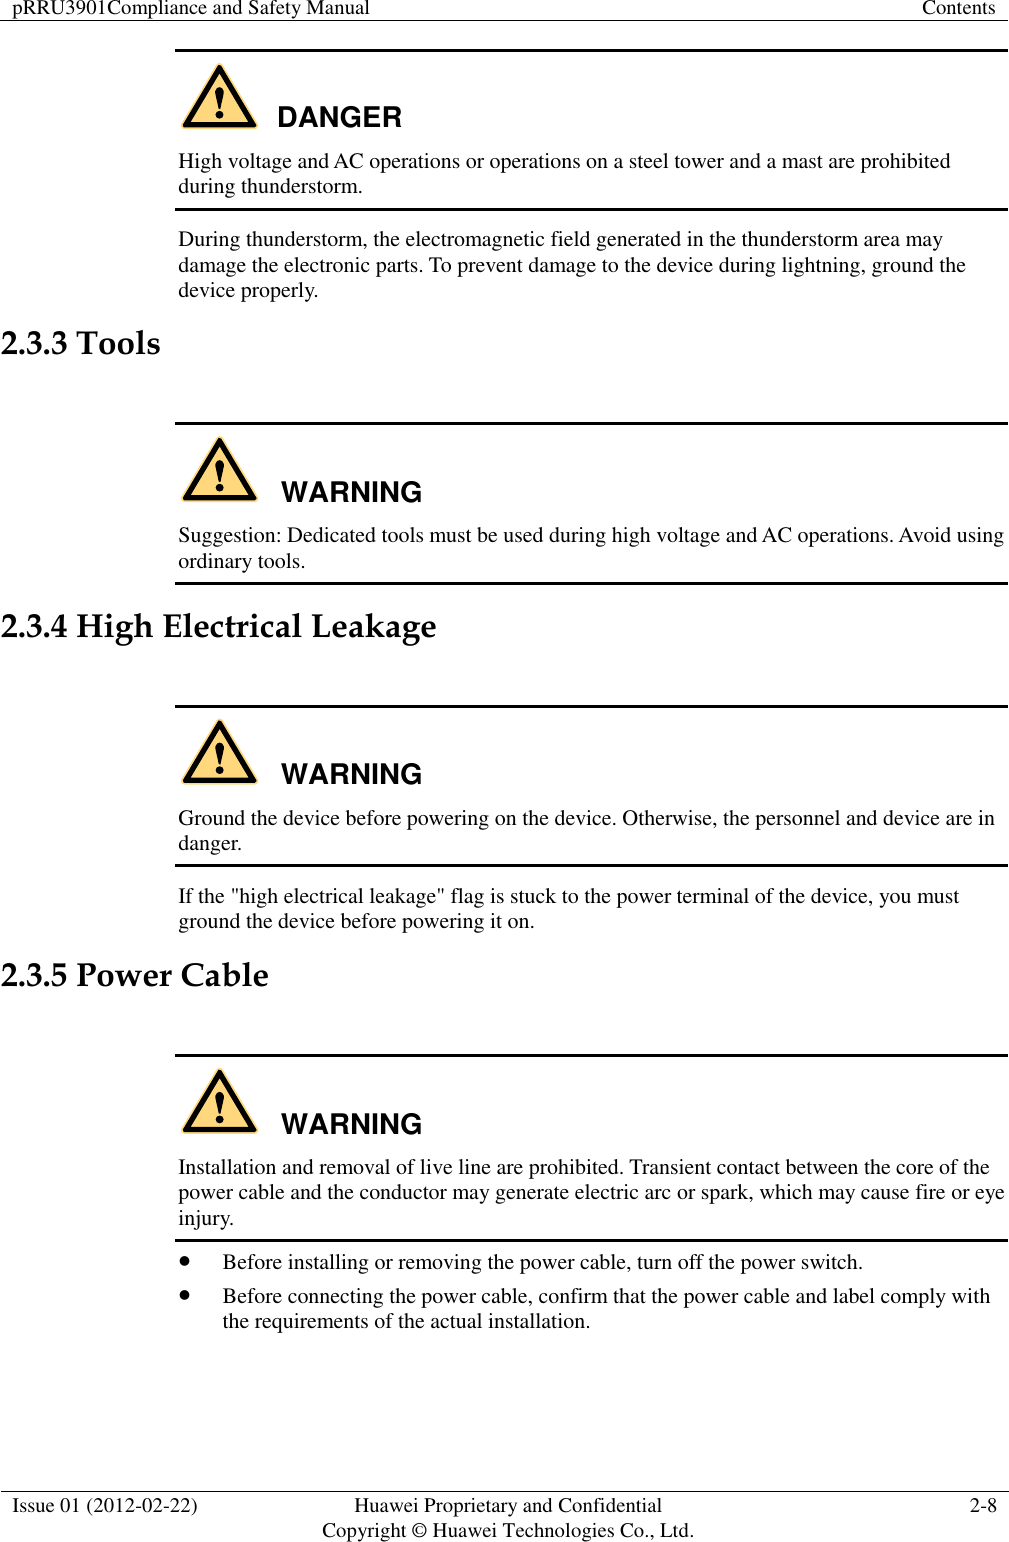 pRRU3901Compliance and Safety Manual Contents  Issue 01 (2012-02-22) Huawei Proprietary and Confidential           Copyright © Huawei Technologies Co., Ltd. 2-8  DANGER High voltage and AC operations or operations on a steel tower and a mast are prohibited during thunderstorm. During thunderstorm, the electromagnetic field generated in the thunderstorm area may damage the electronic parts. To prevent damage to the device during lightning, ground the device properly. 2.3.3 Tools  WARNING Suggestion: Dedicated tools must be used during high voltage and AC operations. Avoid using ordinary tools. 2.3.4 High Electrical Leakage  WARNING Ground the device before powering on the device. Otherwise, the personnel and device are in danger. If the &quot;high electrical leakage&quot; flag is stuck to the power terminal of the device, you must ground the device before powering it on. 2.3.5 Power Cable  WARNING Installation and removal of live line are prohibited. Transient contact between the core of the power cable and the conductor may generate electric arc or spark, which may cause fire or eye injury.  Before installing or removing the power cable, turn off the power switch.  Before connecting the power cable, confirm that the power cable and label comply with the requirements of the actual installation.  